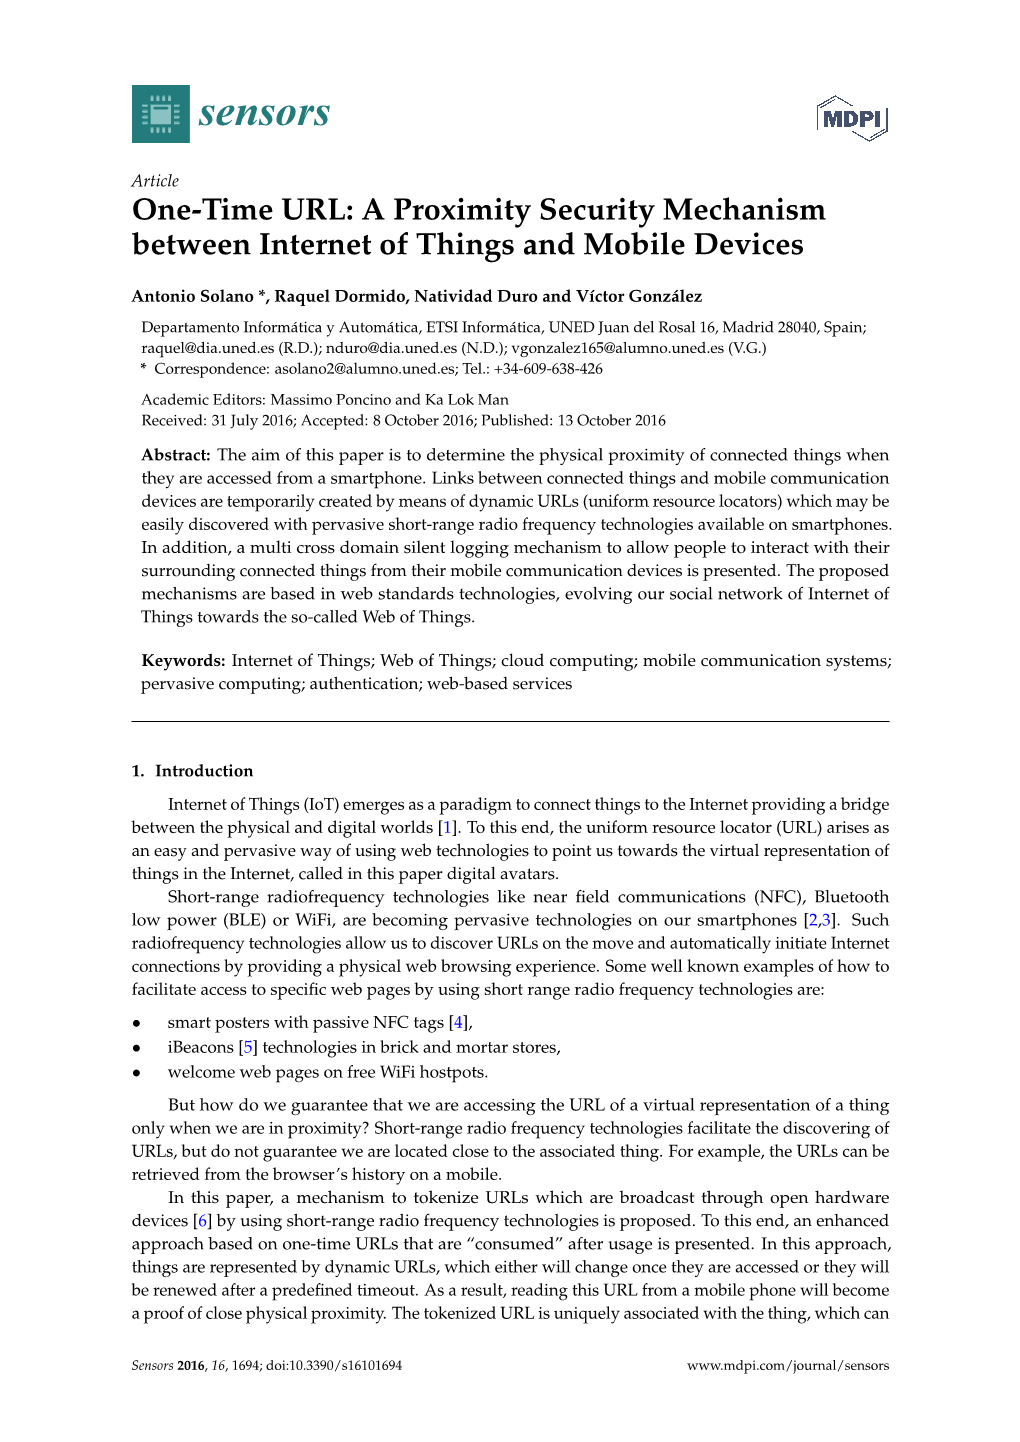 One-Time URL: a Proximity Security Mechanism Between Internet of Things and Mobile Devices